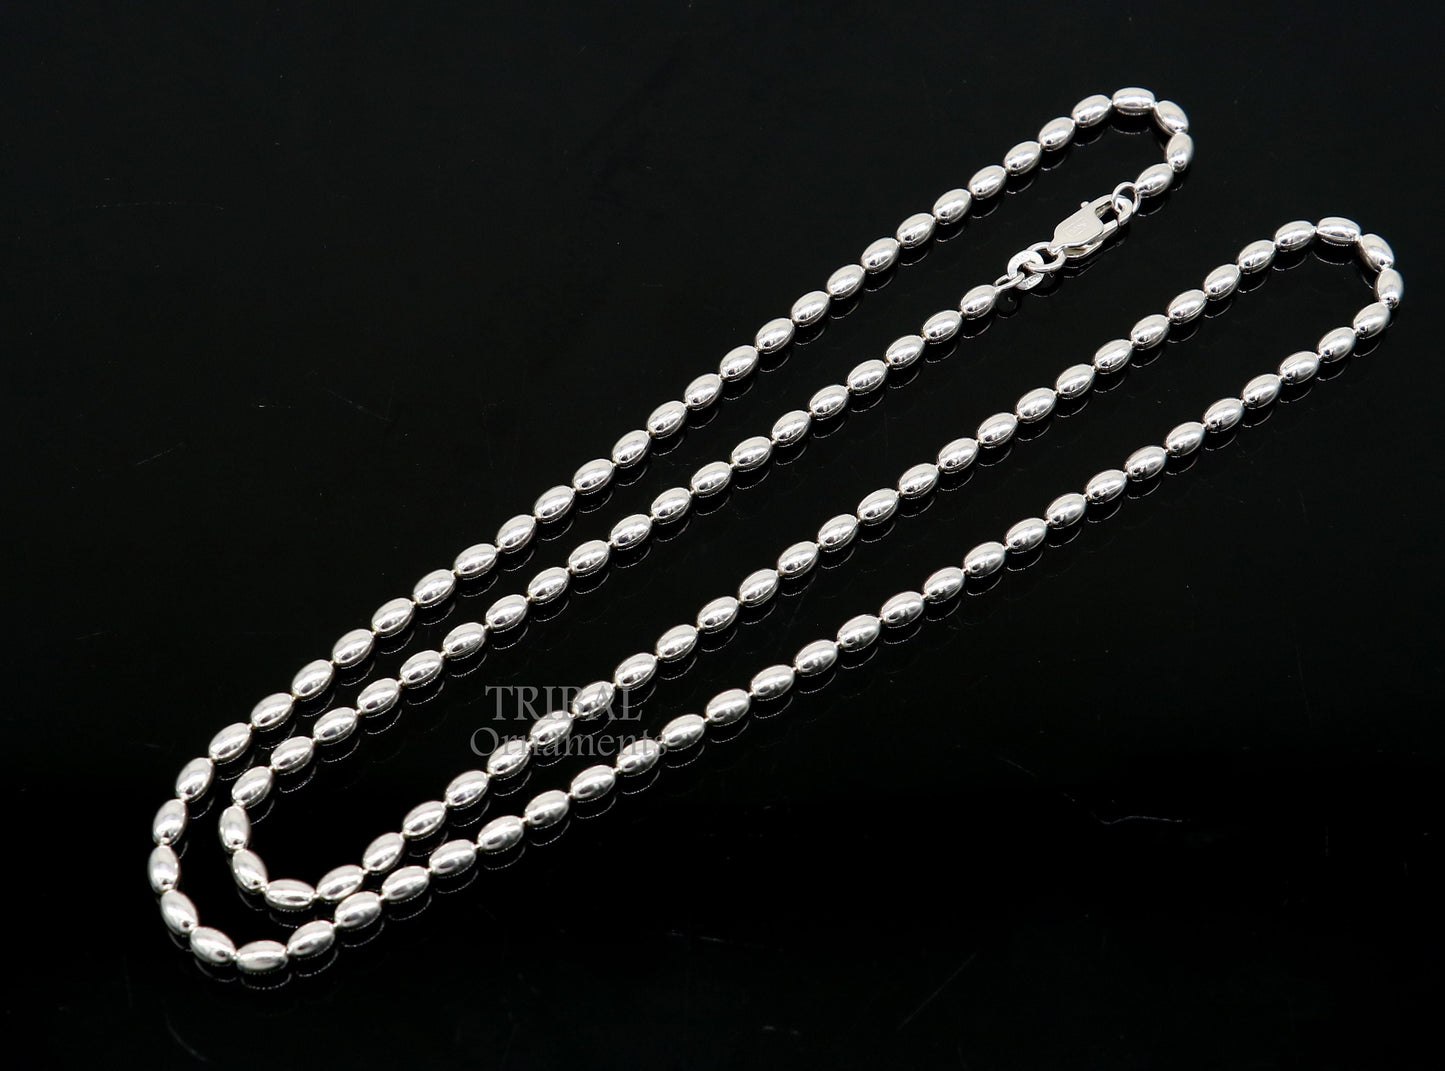 3MM 925 sterling silver handmade delicate trendy fancy beaded chain necklace baht chain for captivating beauty and graceful movement CH220 - TRIBAL ORNAMENTS